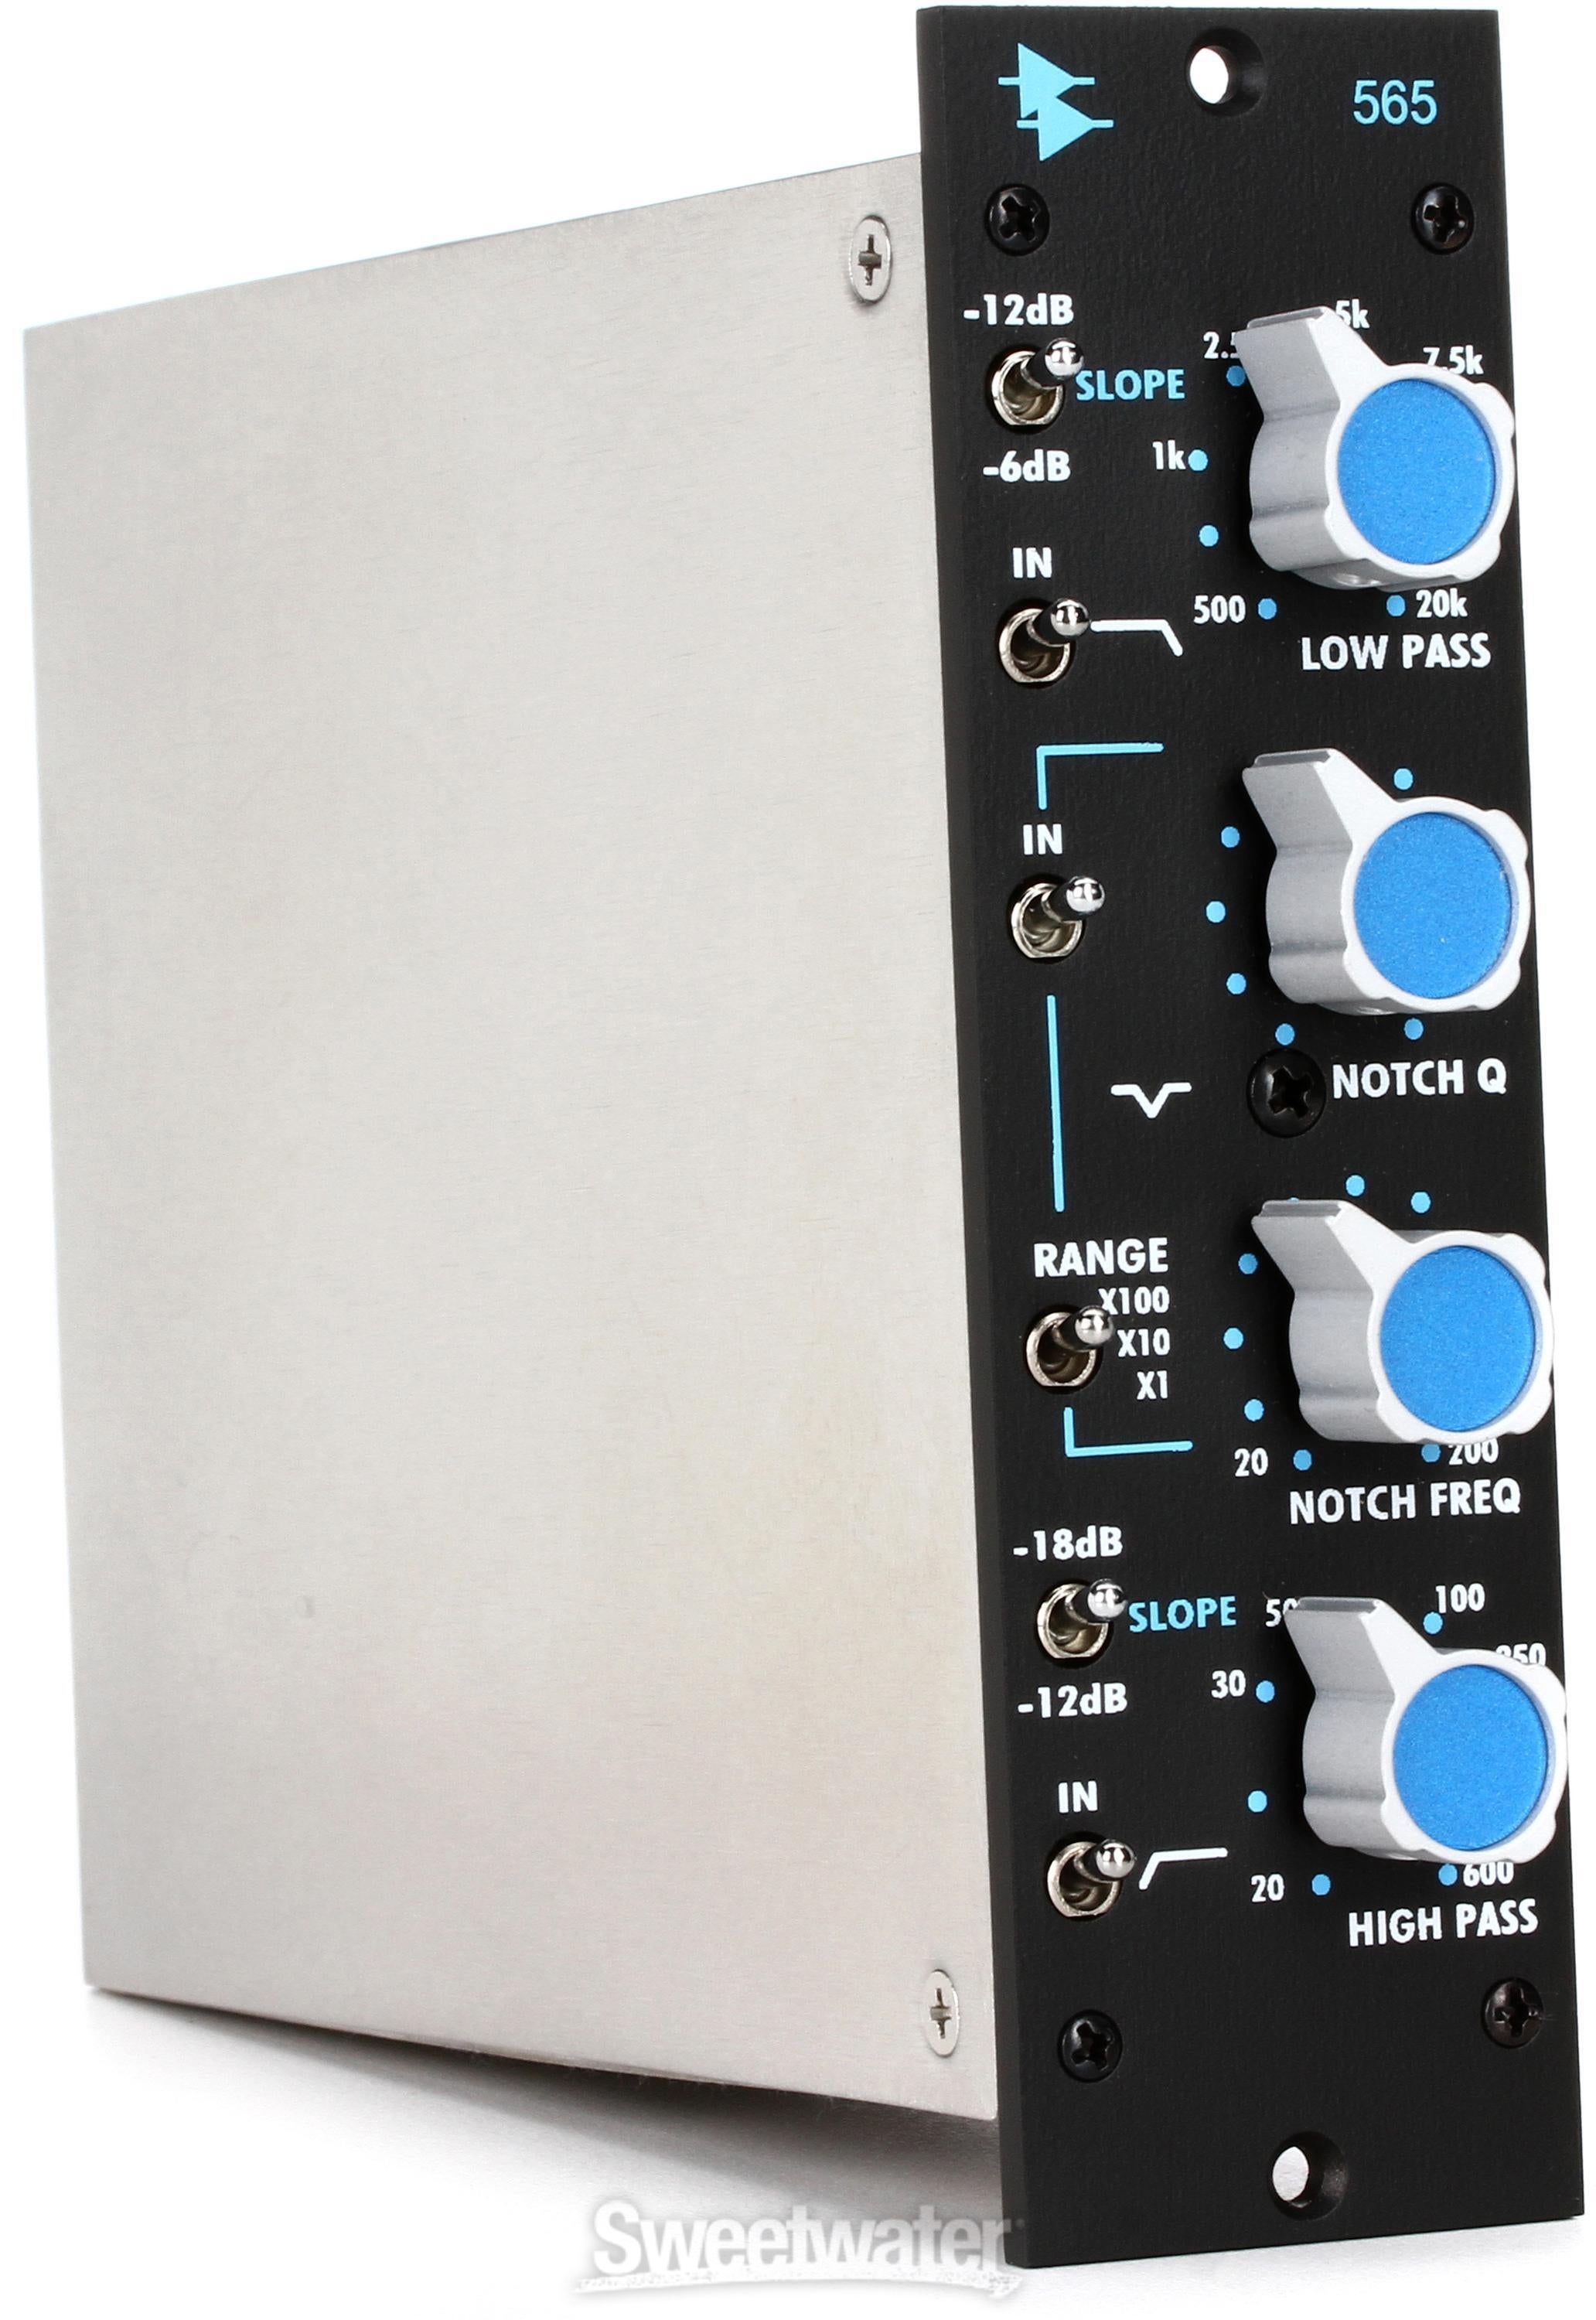 API 565 Filter 500 Series Equalizer | Sweetwater